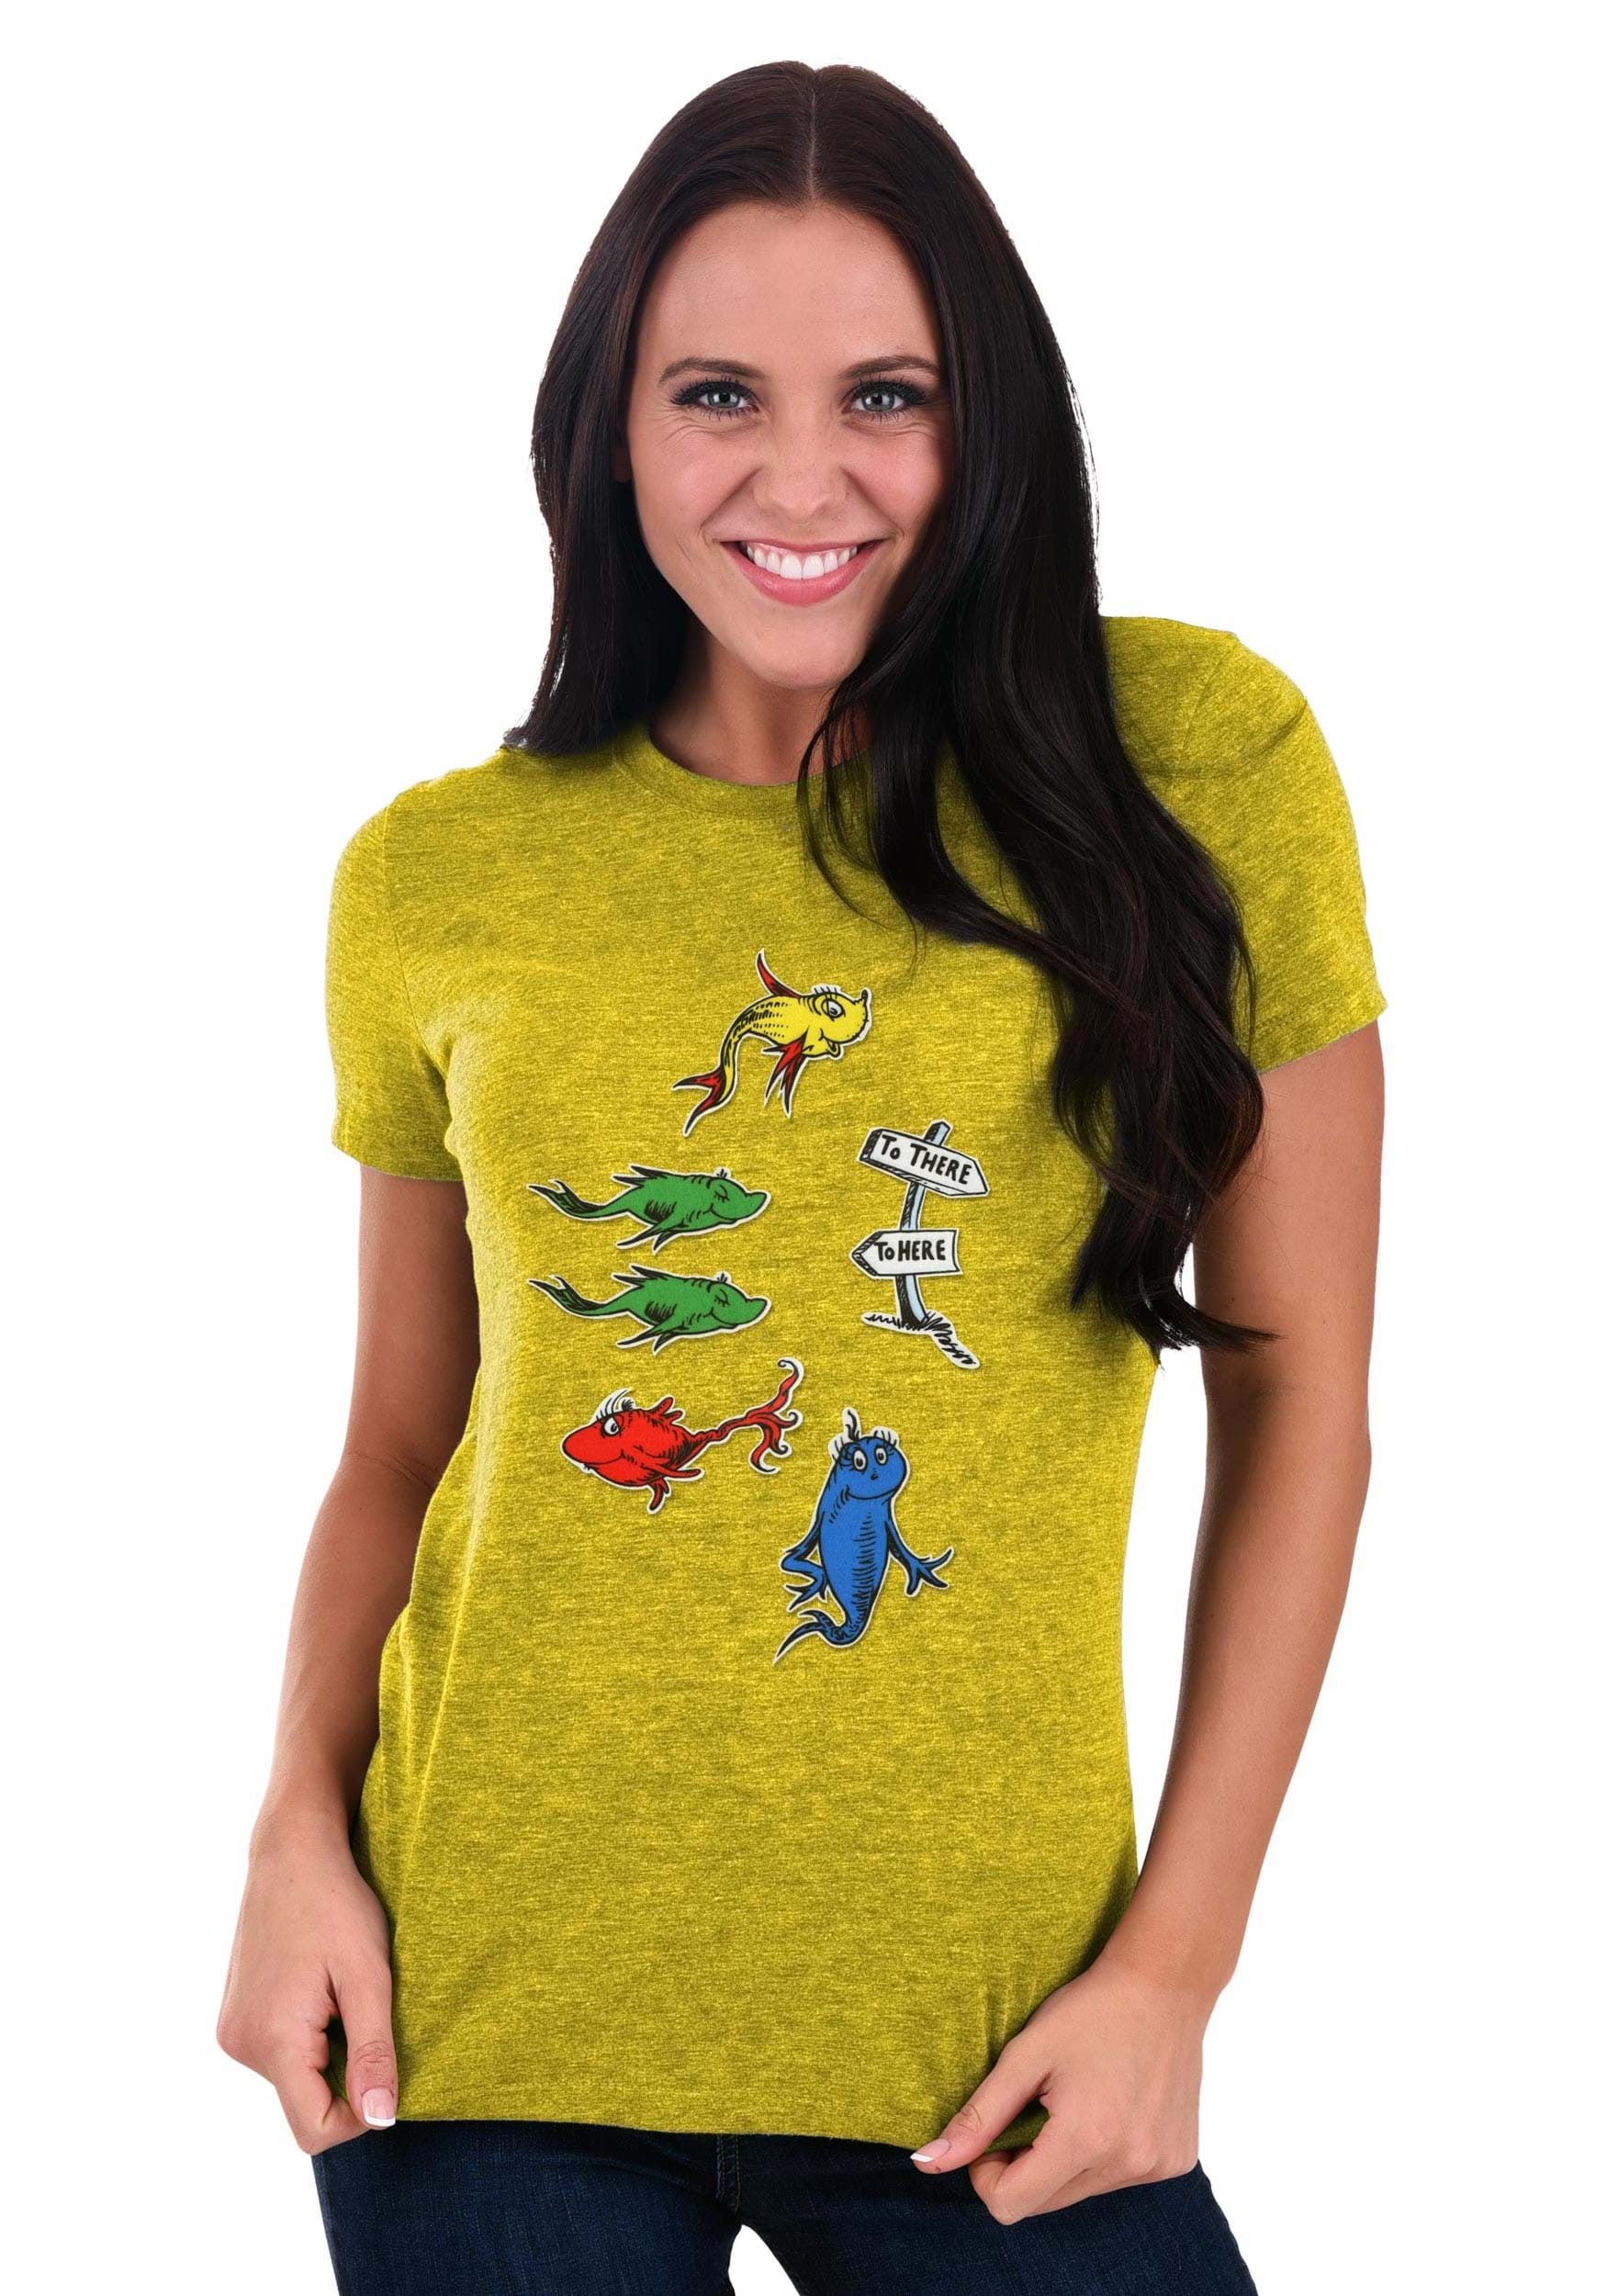 Dr. Seuss’s One Fish Two Fish Patch Set